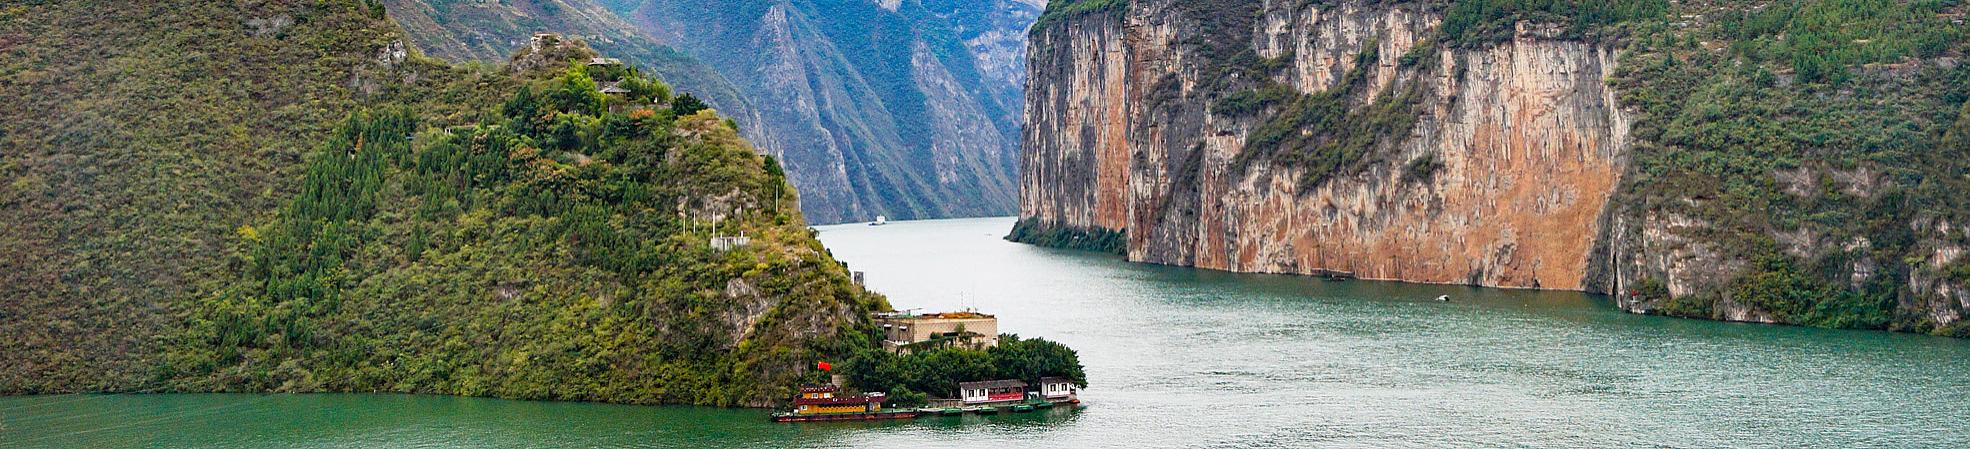 The Three Gorges - the Highlight of Yangtze River 